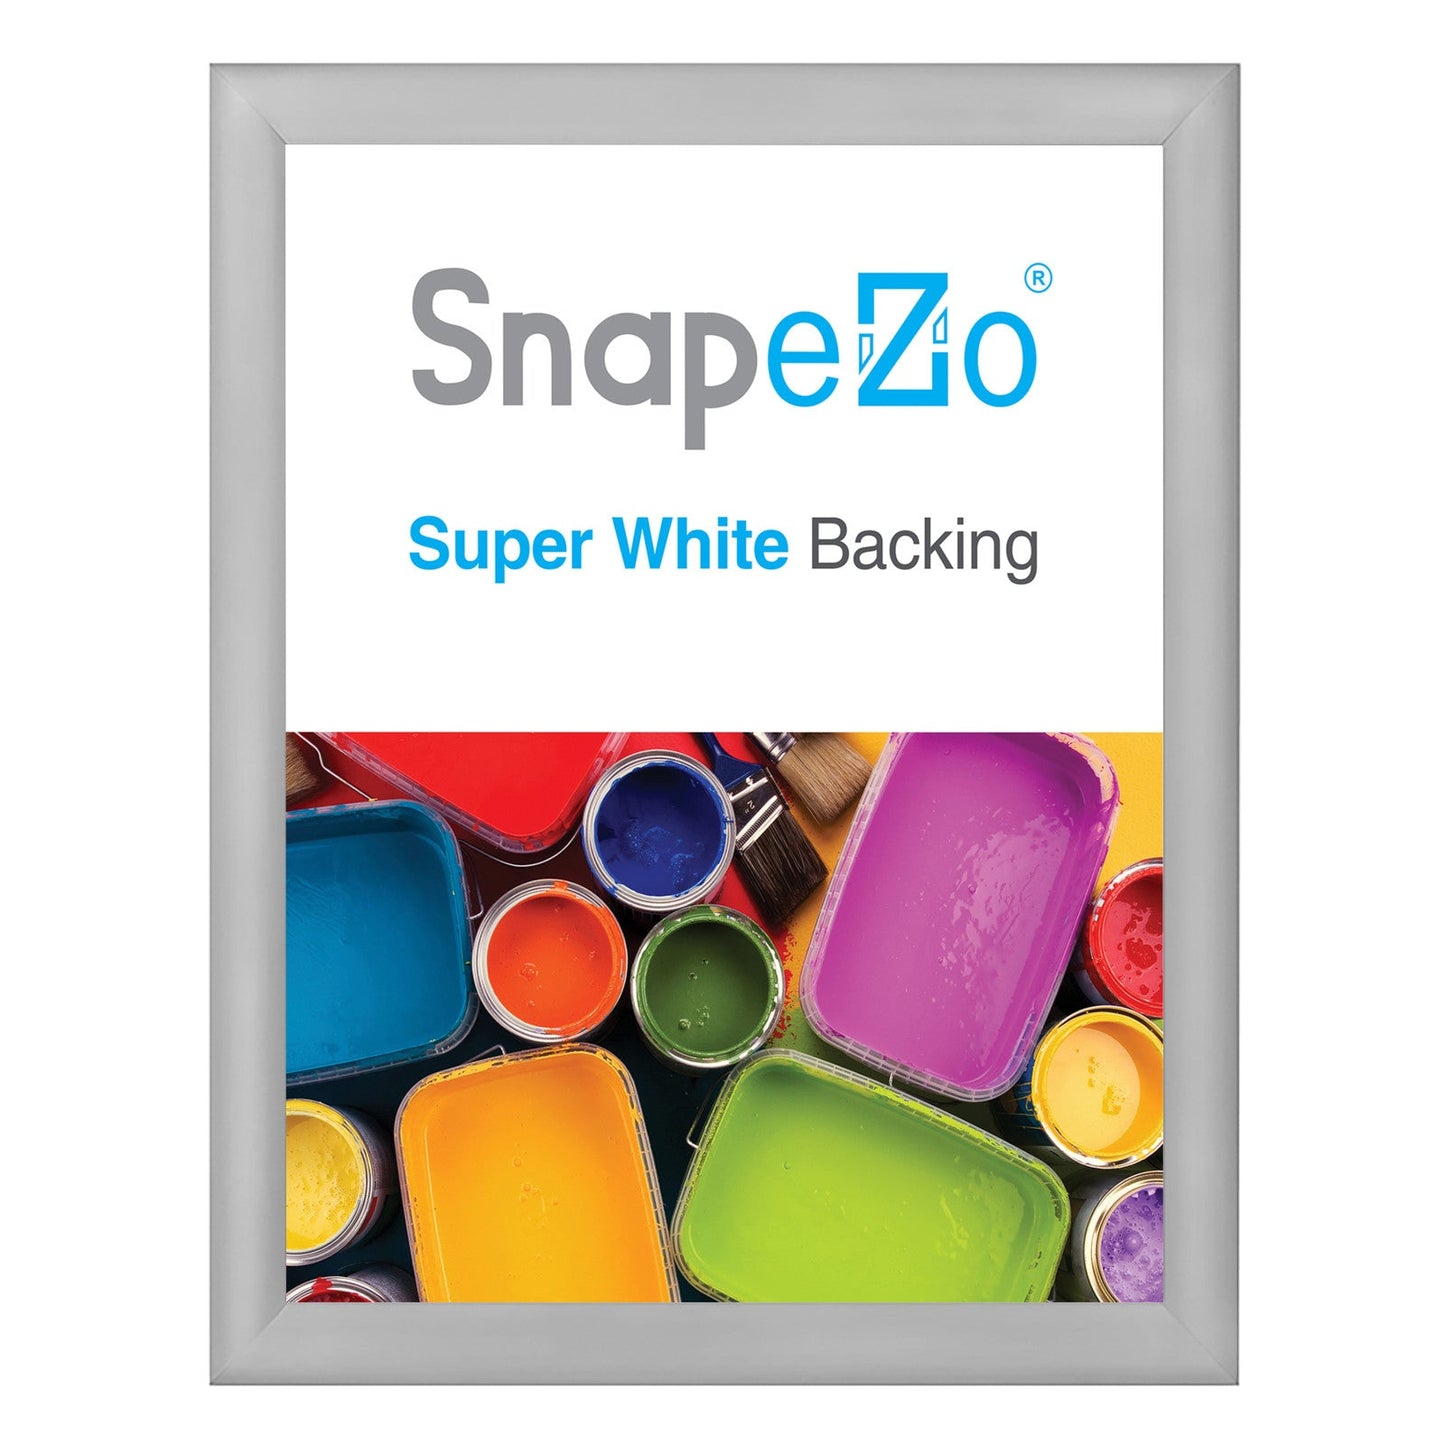 Load image into Gallery viewer, 36x48 Silver SnapeZo® Snap Frame - 1.2&amp;quot; Profile
